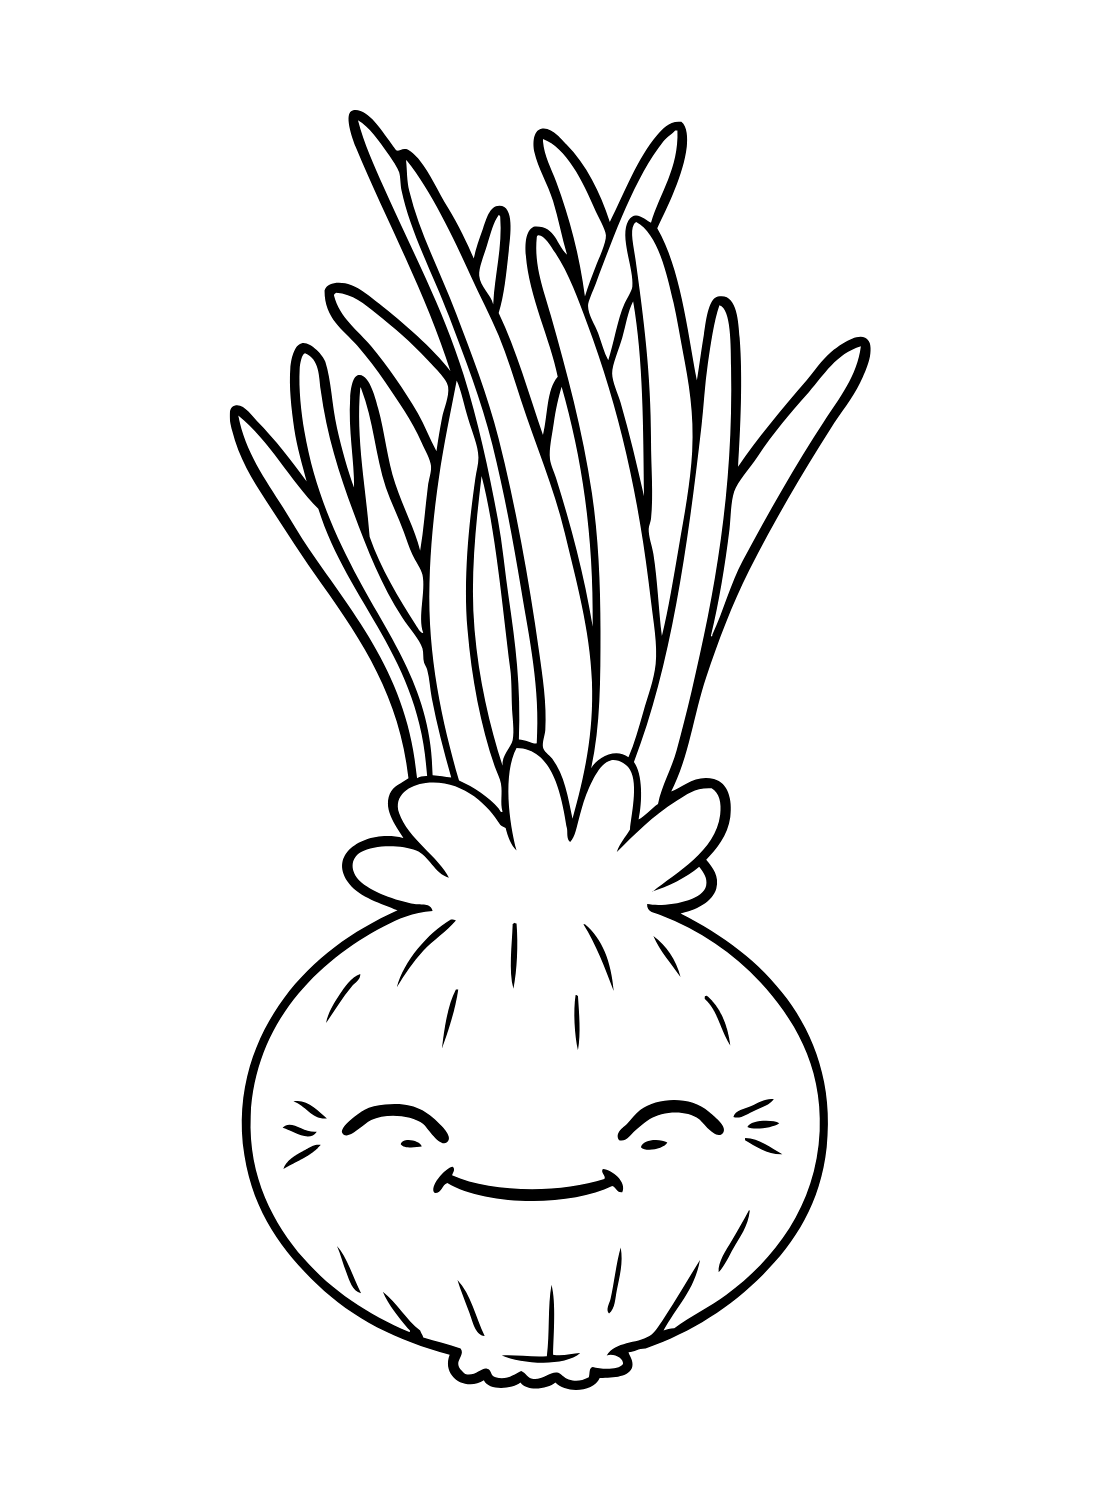 Smiling Onion Coloring Page